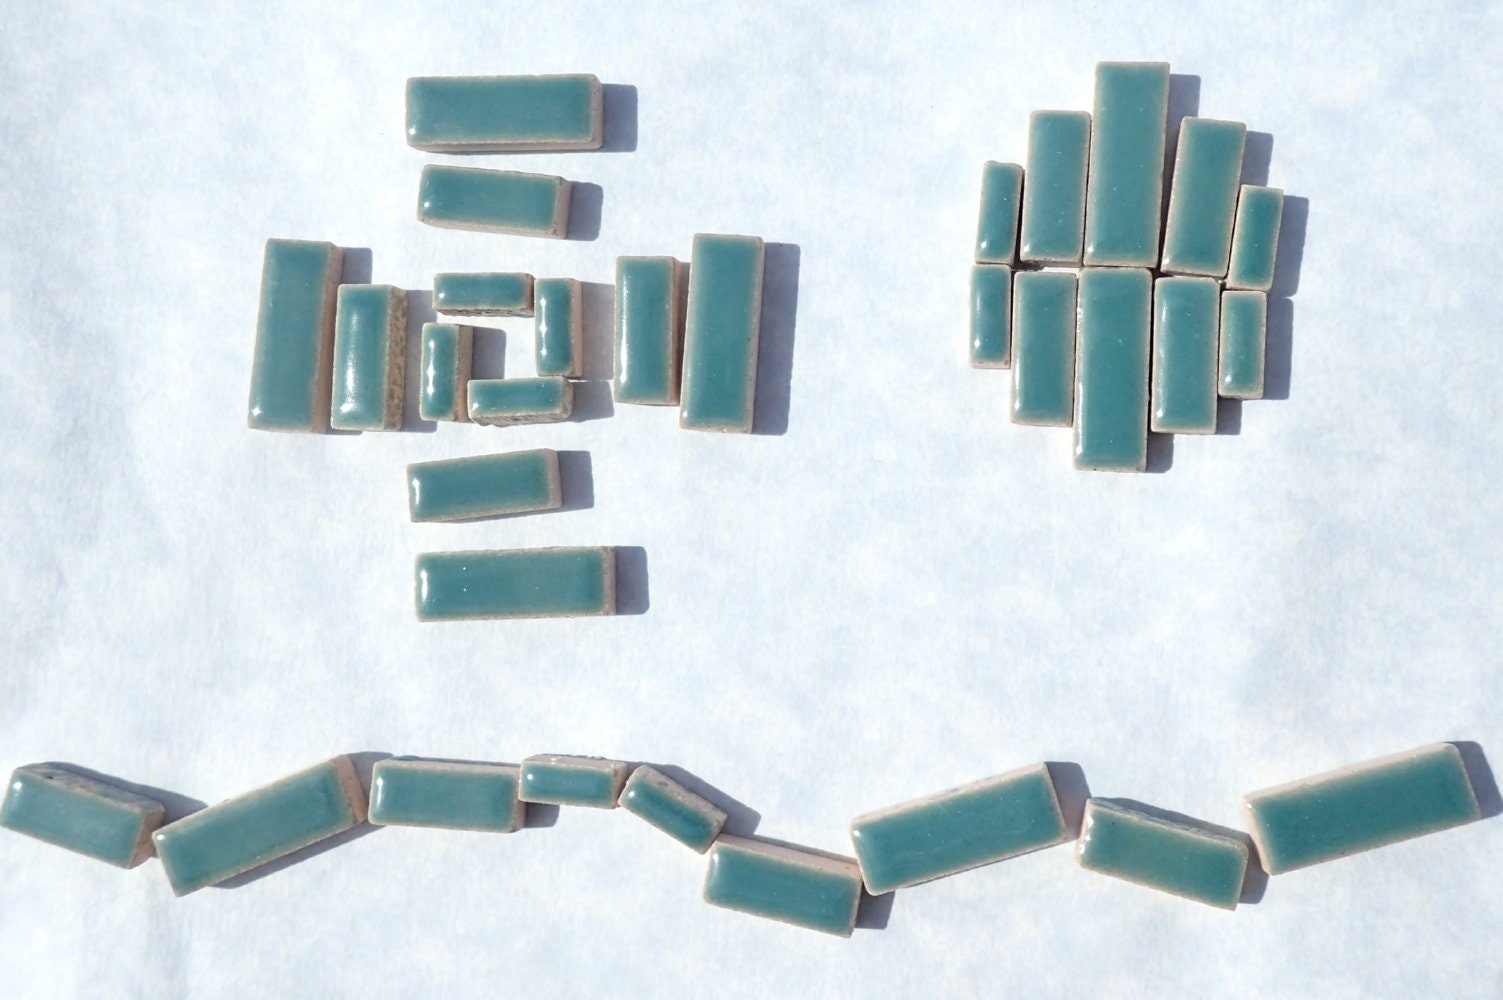 Deep Sea Green Mini Rectangles Mosaic Tiles - 50g Ceramic in Mix of 3 Sizes 1/2" and 3/4" in Phthalo Green